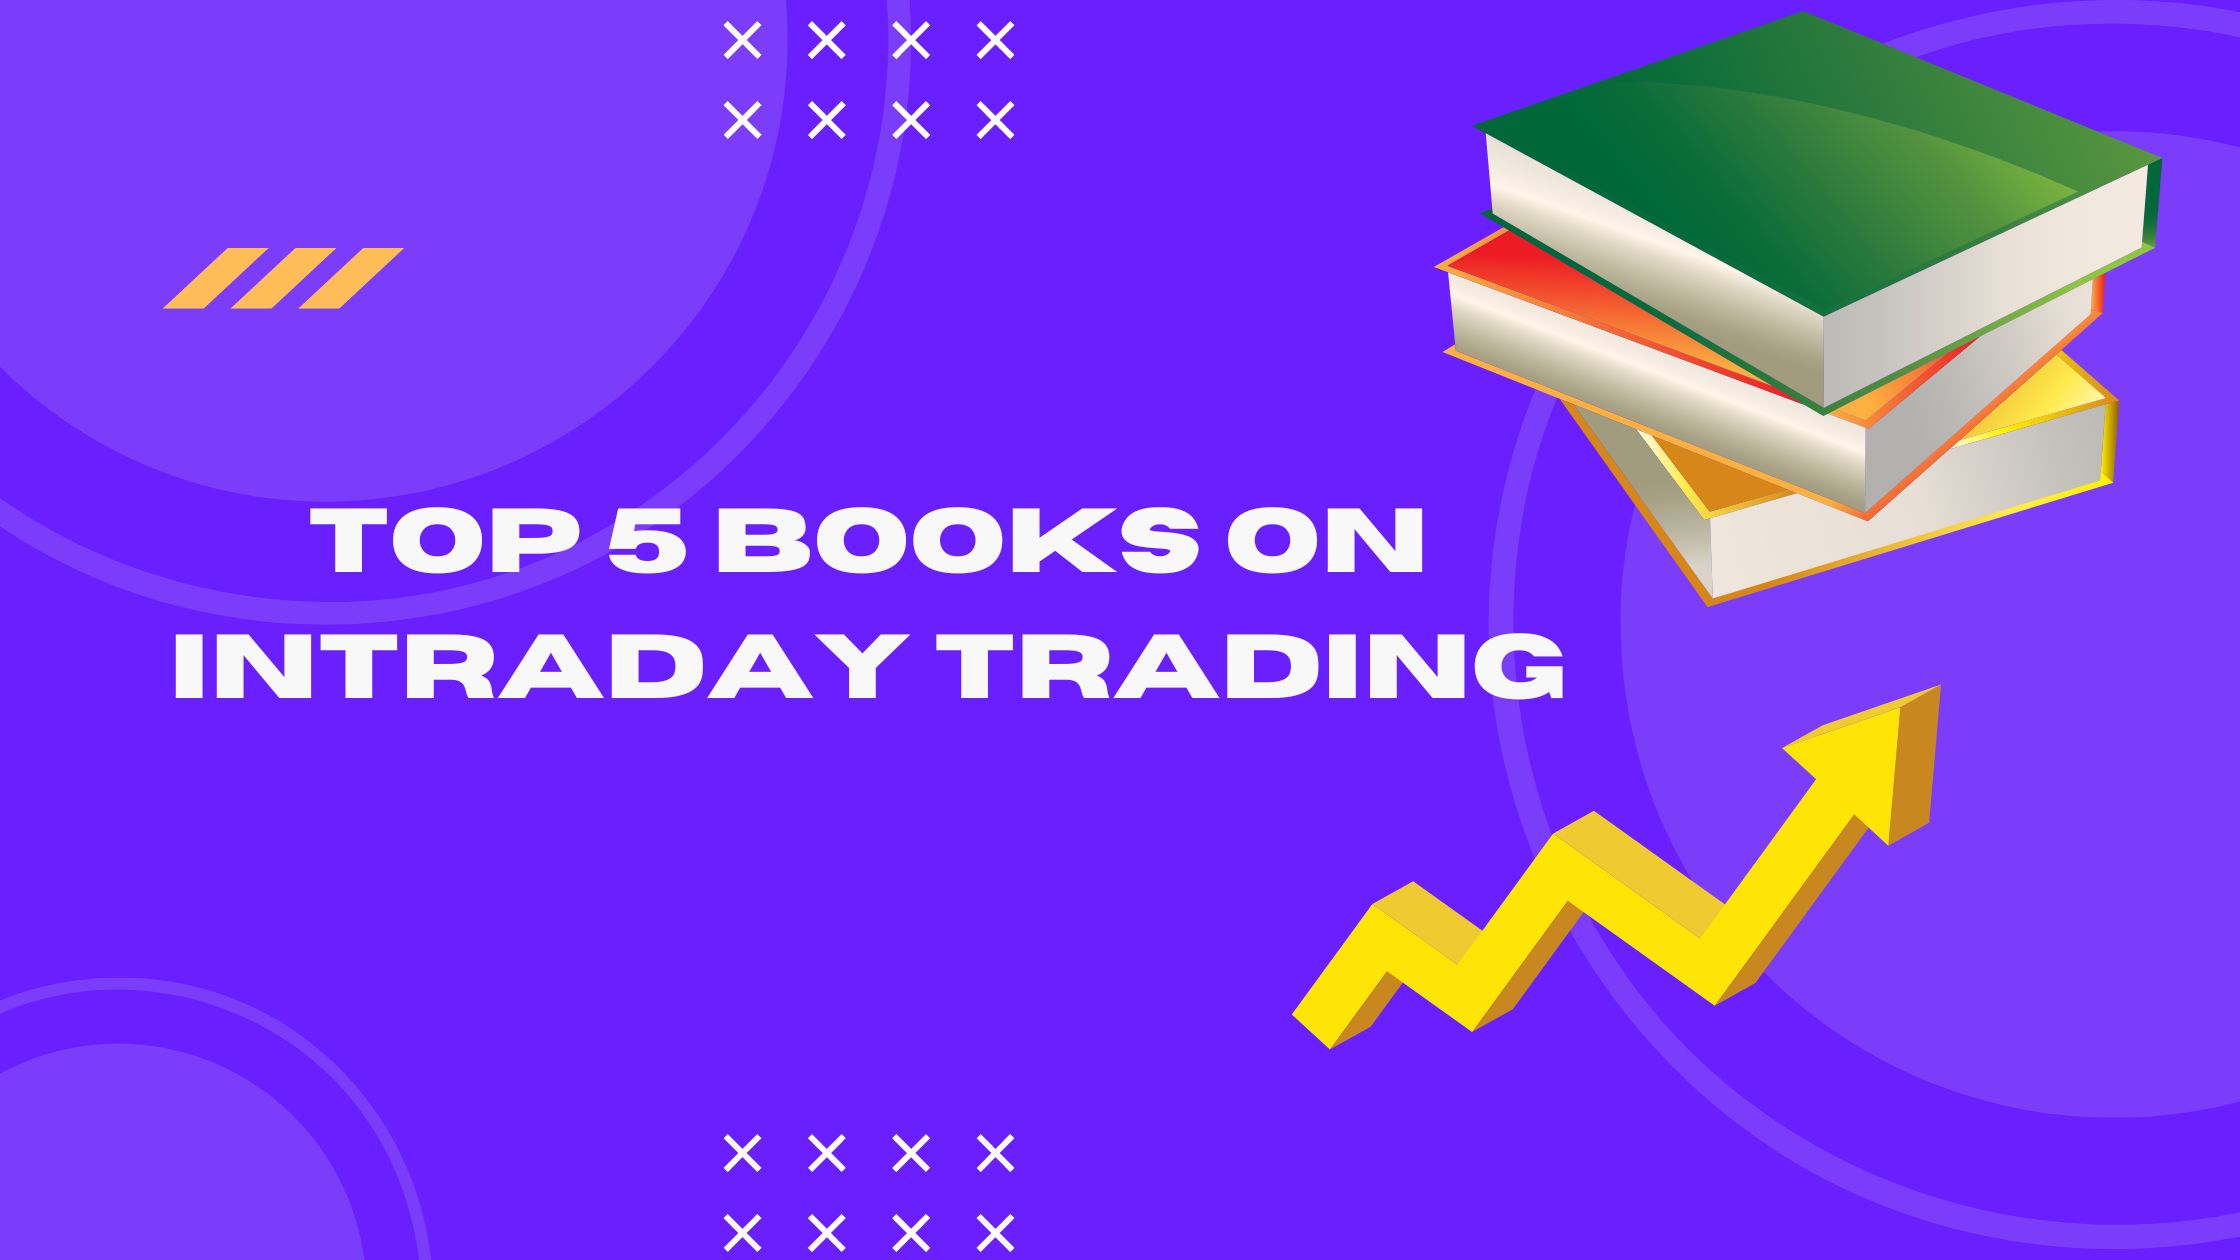 Intraday Trading Books